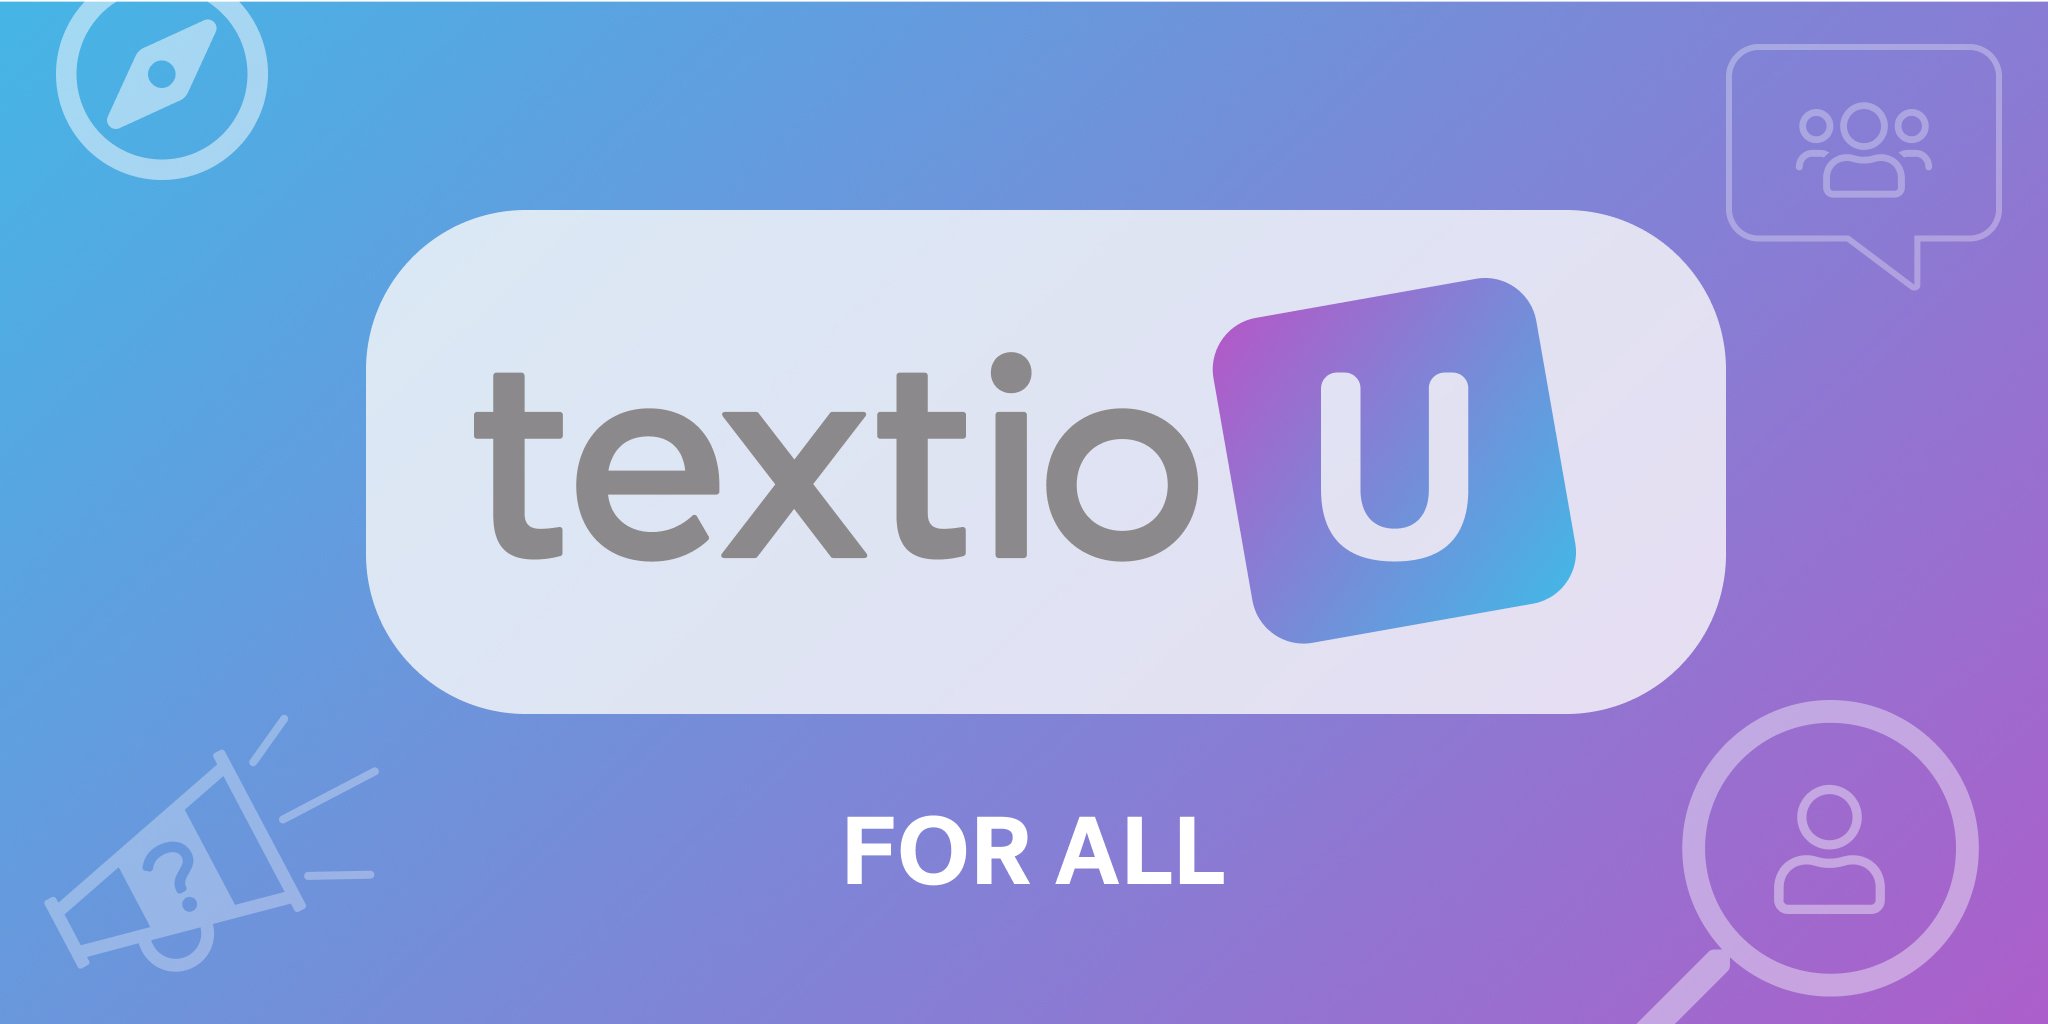 Graphic of Textio U for all on a blue to purple gradient background.